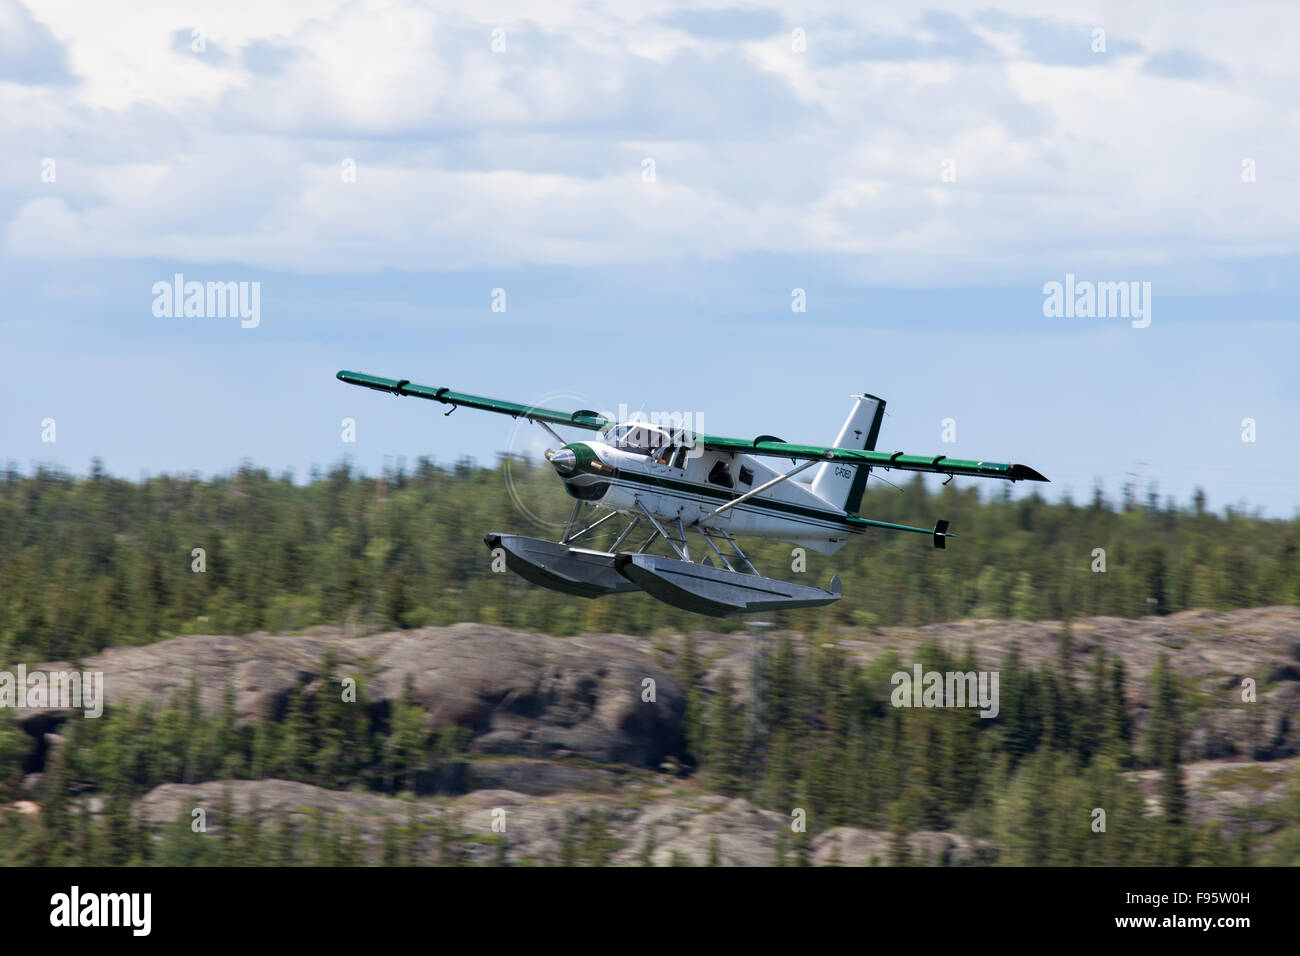 A Beaver floatplane takes off from Yellowknife, Northwest Territories, Canada Stock Photo